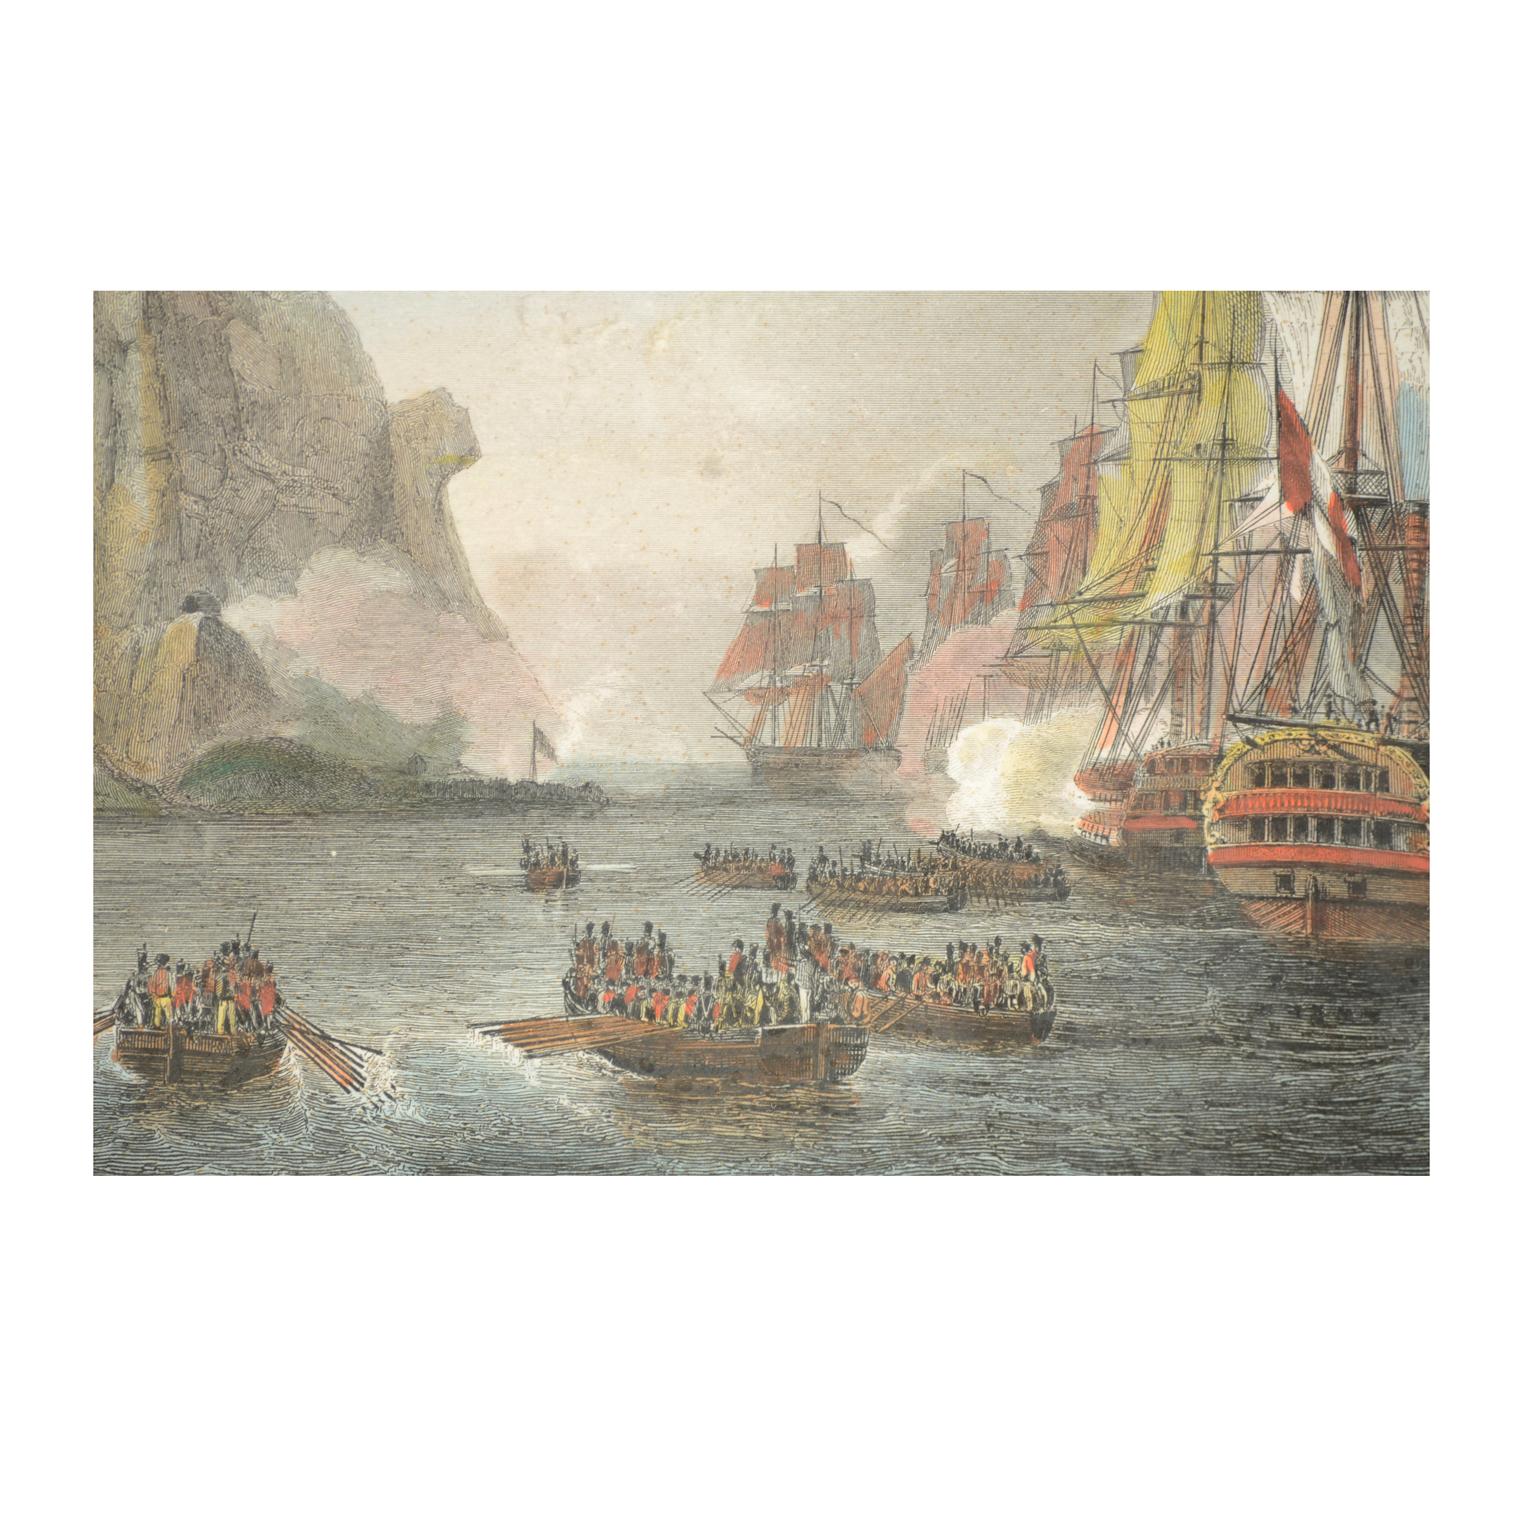 Antique Lithographic Print of the Diamond Rock Battle Early 1900s, Oakwood Frame For Sale 2